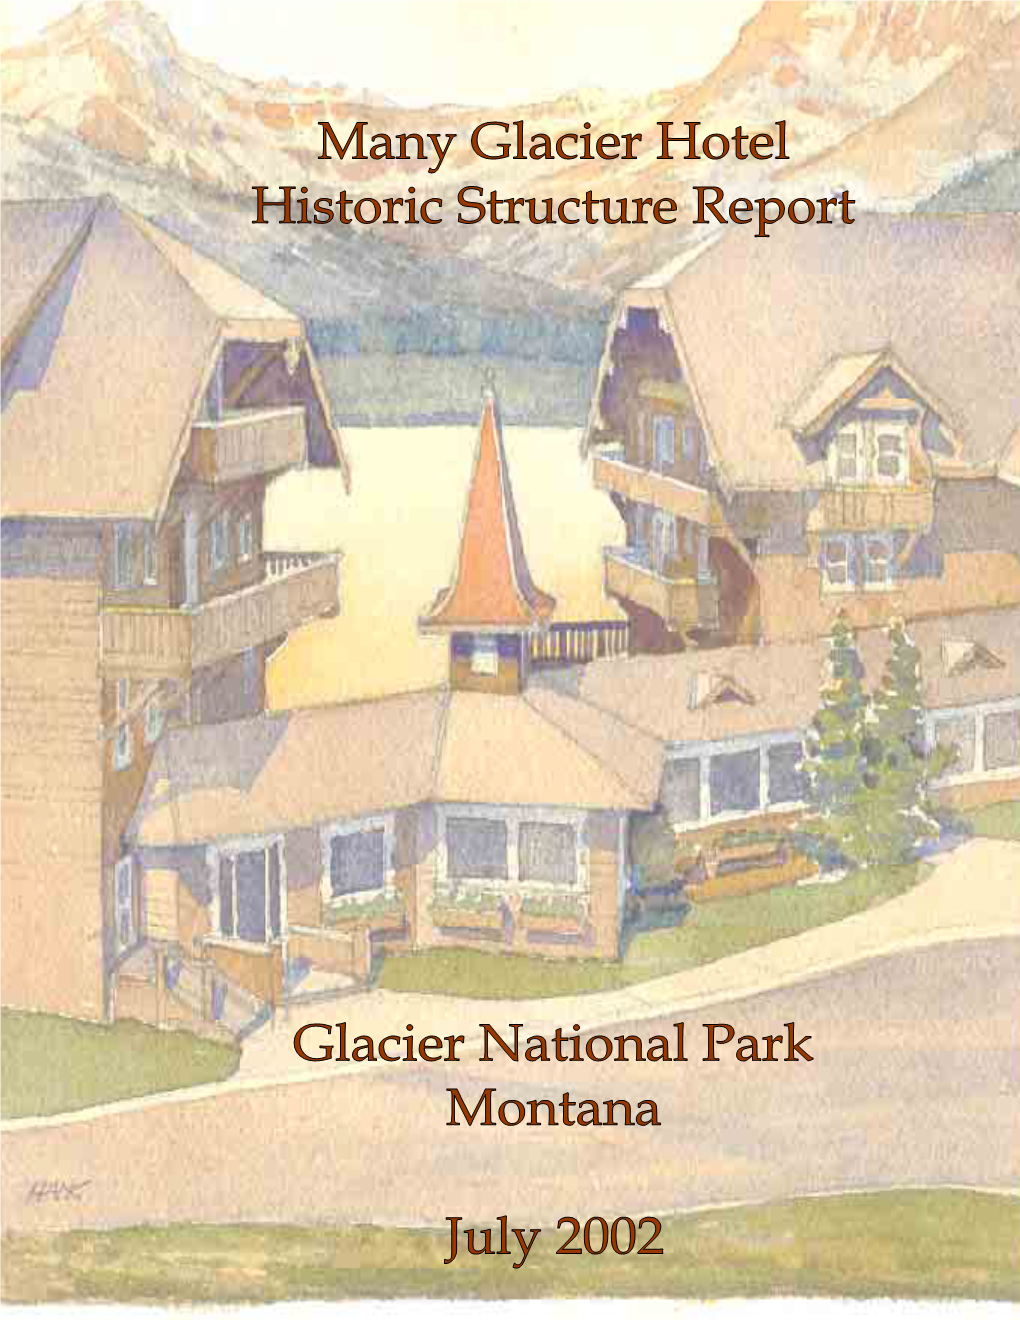 Many Glacier Hotel: Historic Structures Report